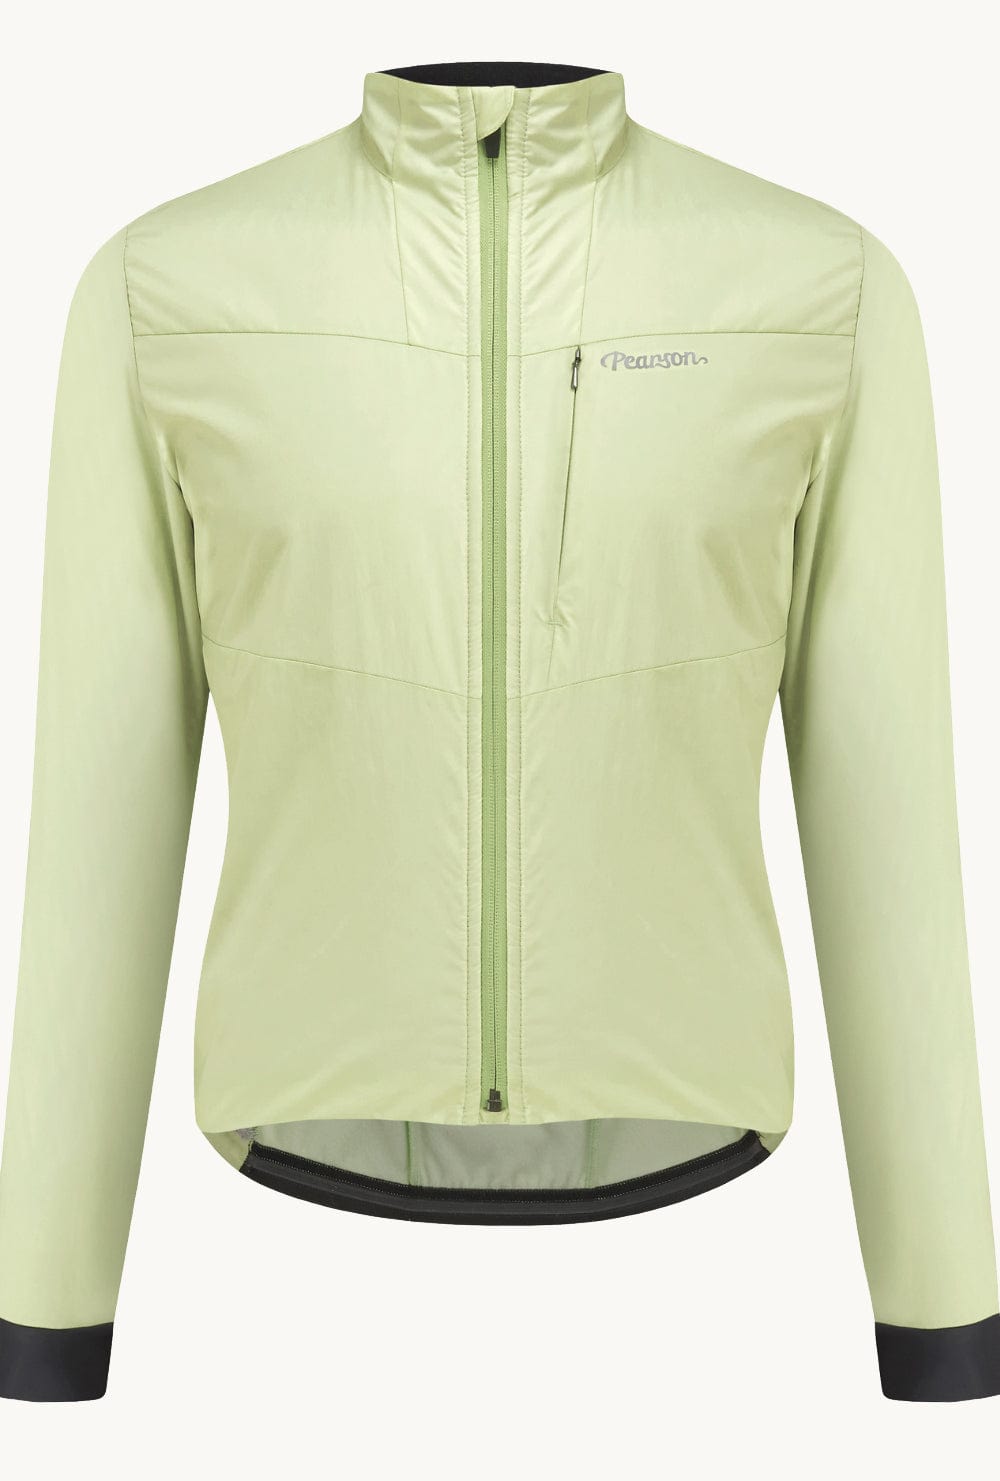 Pearson Cycles Pearson 1860, Test Your Mettle - Polartec® Insulated Jacket Shadow Lime, Shadow Lime / Small